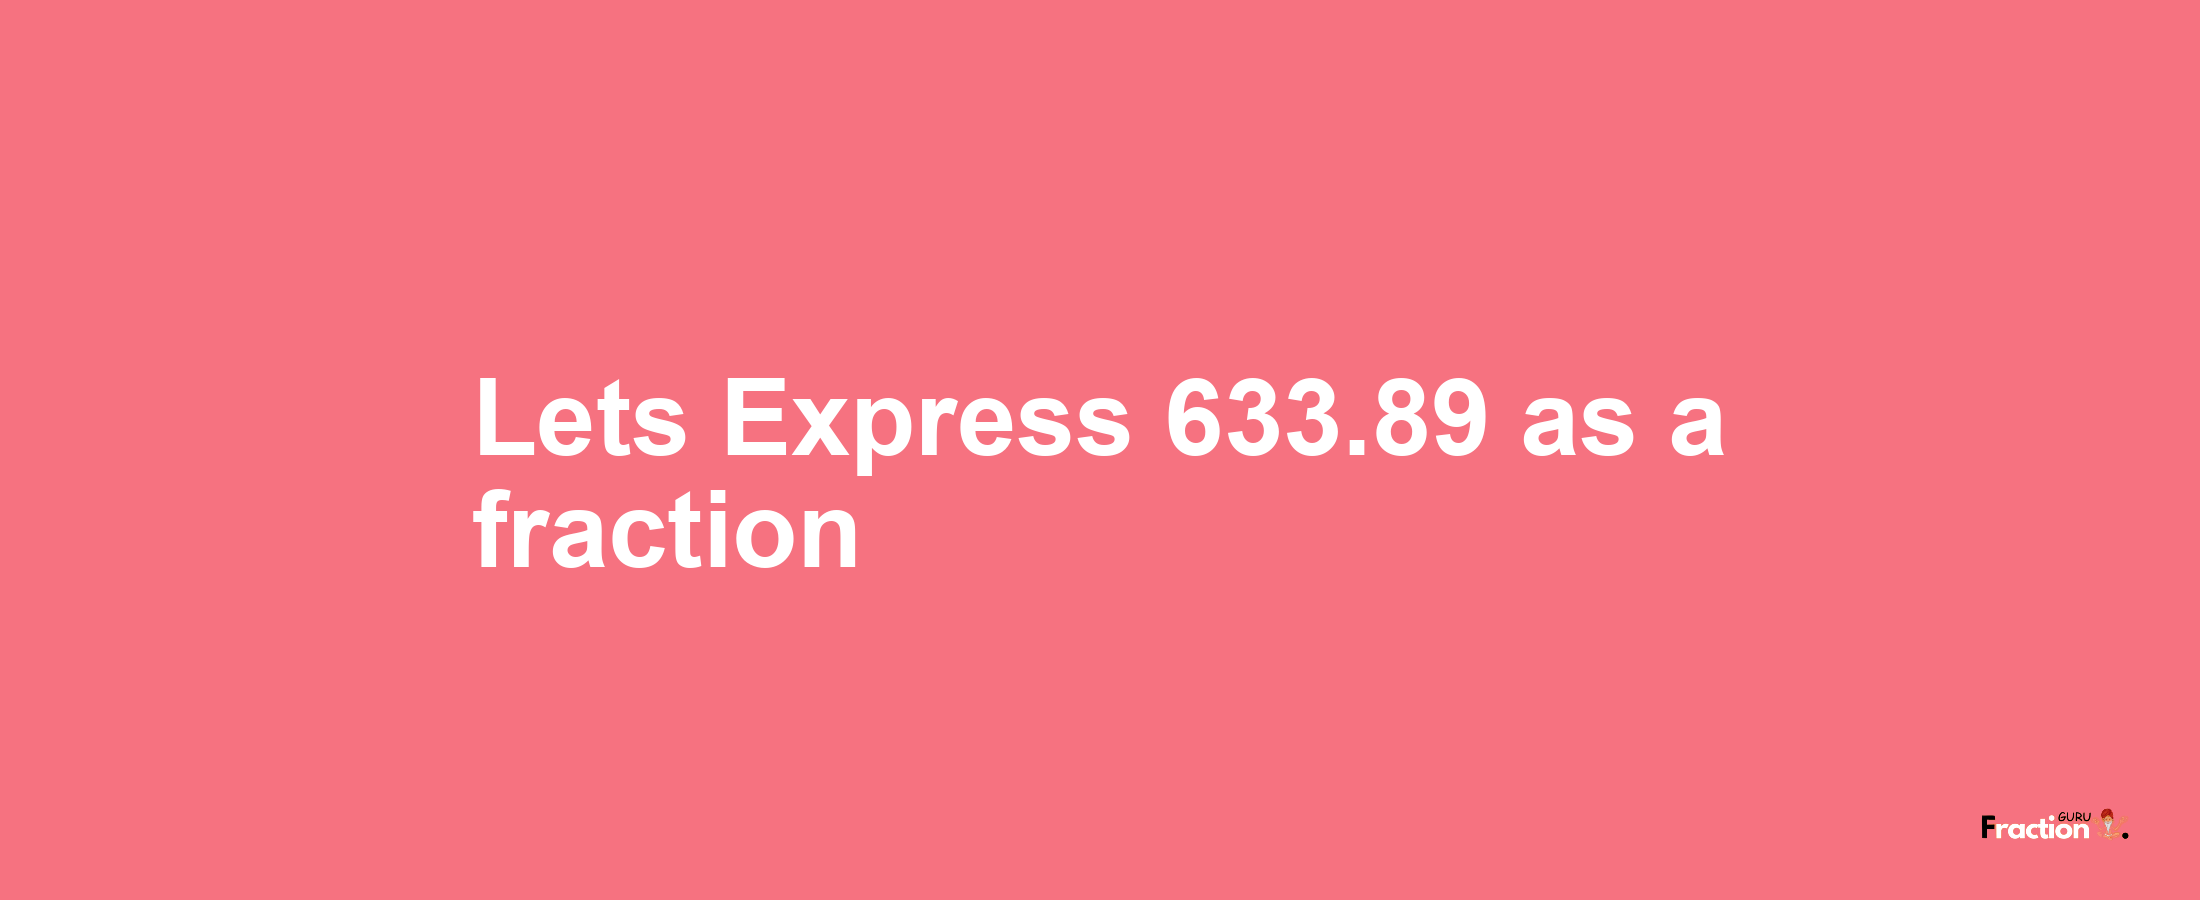 Lets Express 633.89 as afraction